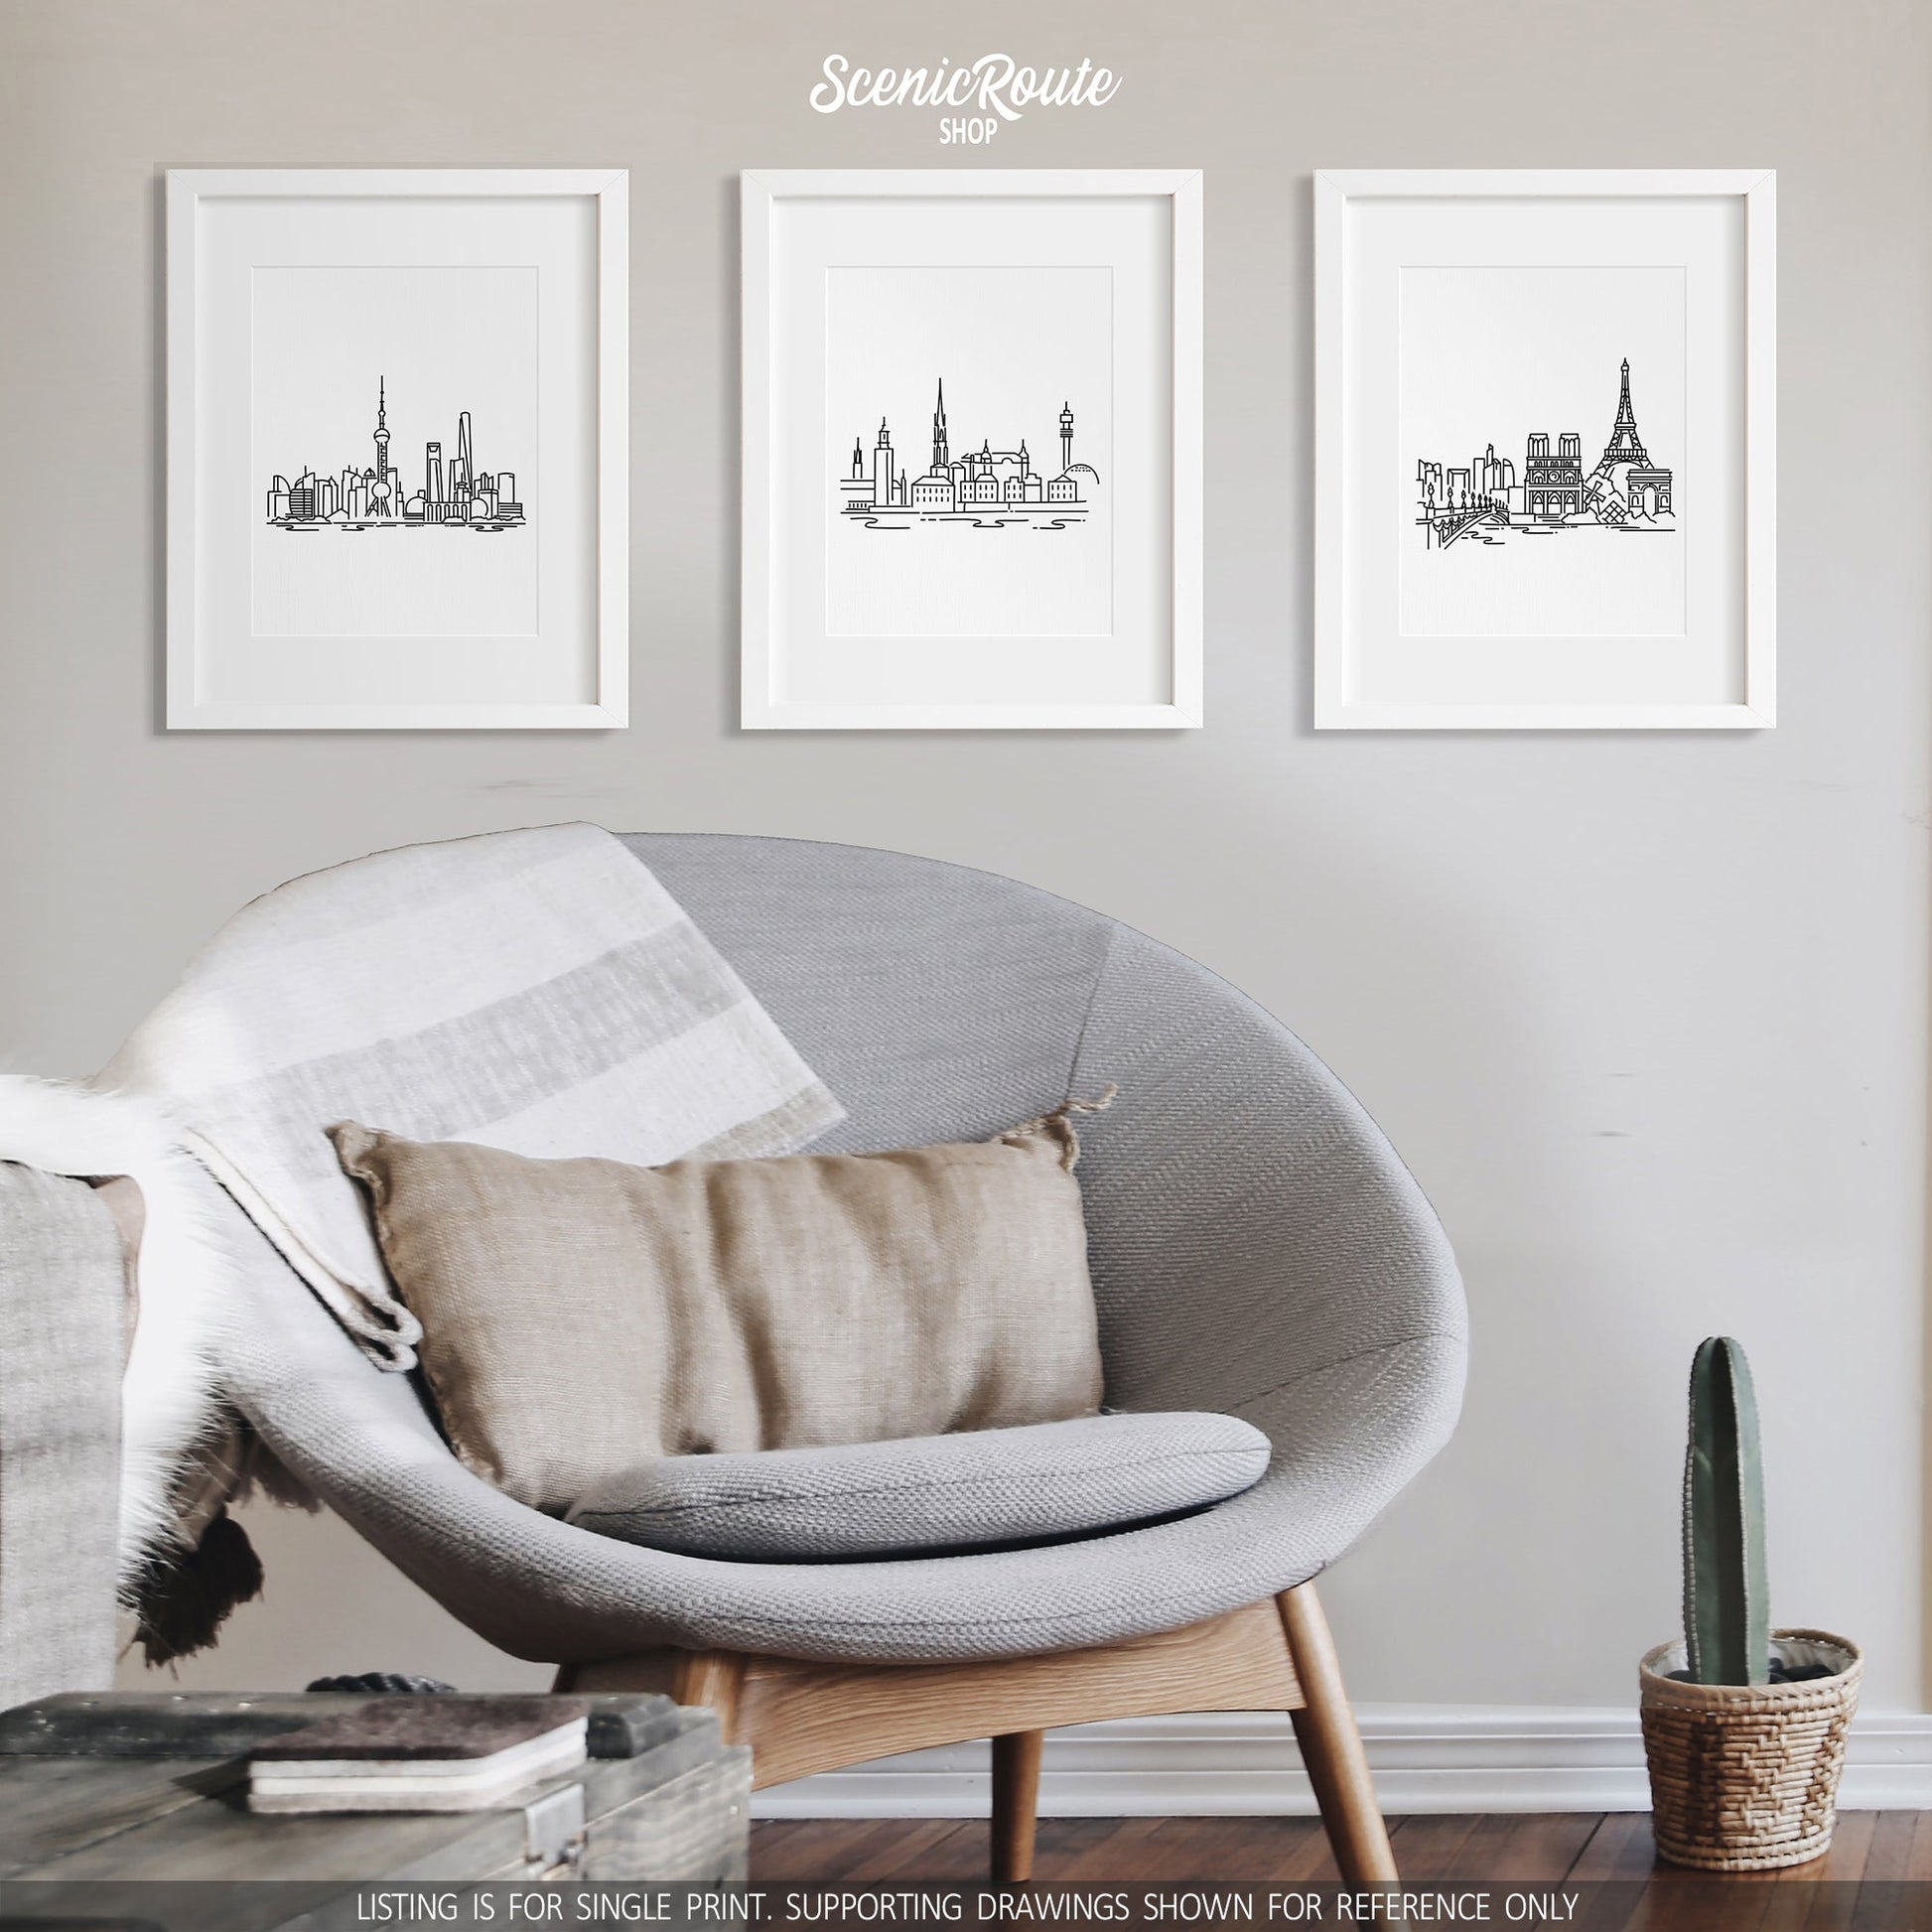 A group of three framed drawings on a wall above a round chair. The line art drawings include the Shanghai Skyline, Stockholm Skyline, and Paris Skyline